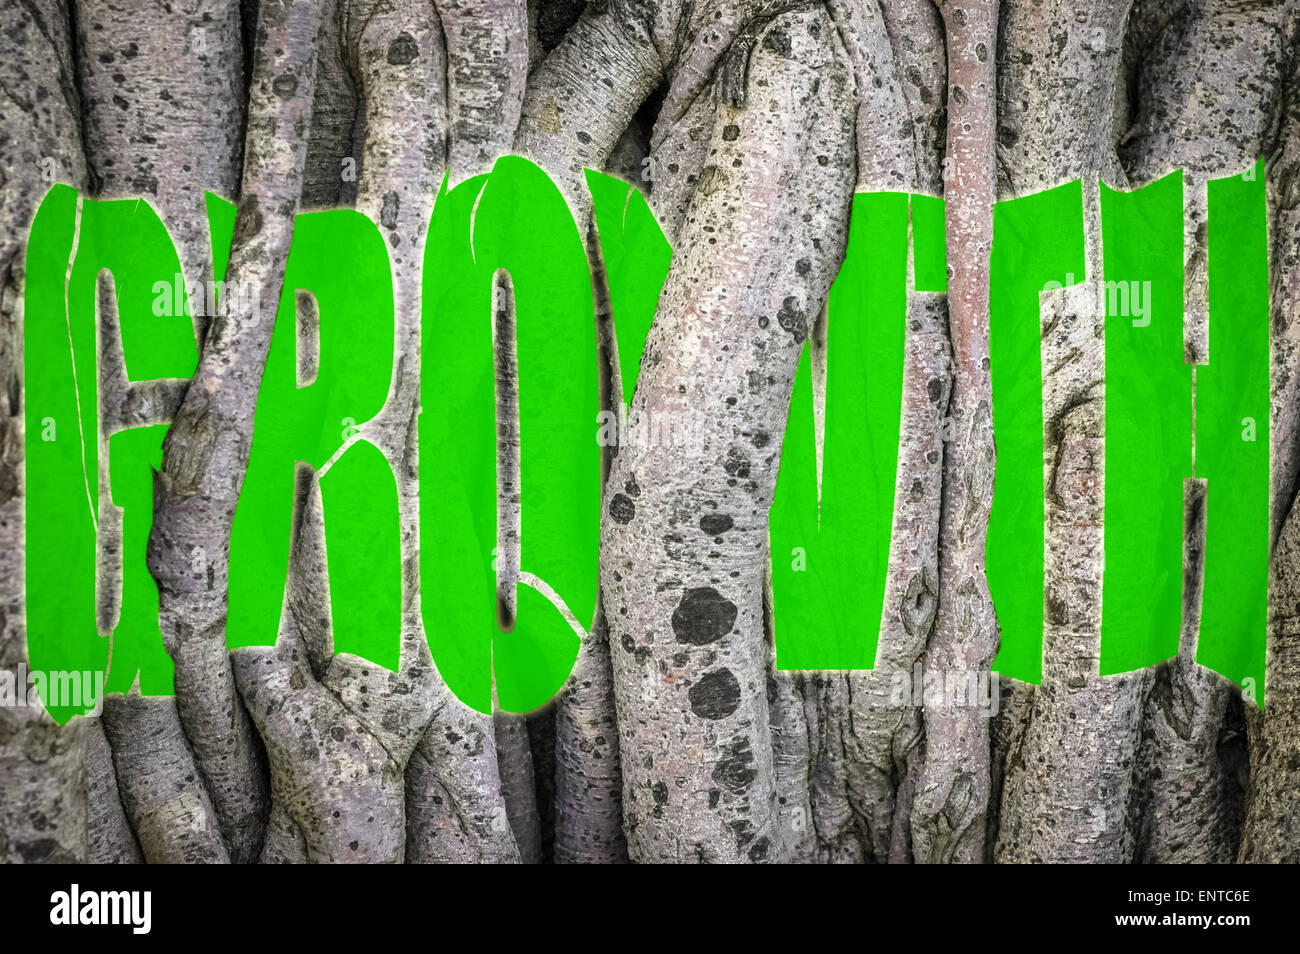 Conceptual Image Of The Word Growth Twisted And Torn Behind The Vines Of A Tree Stock Photo